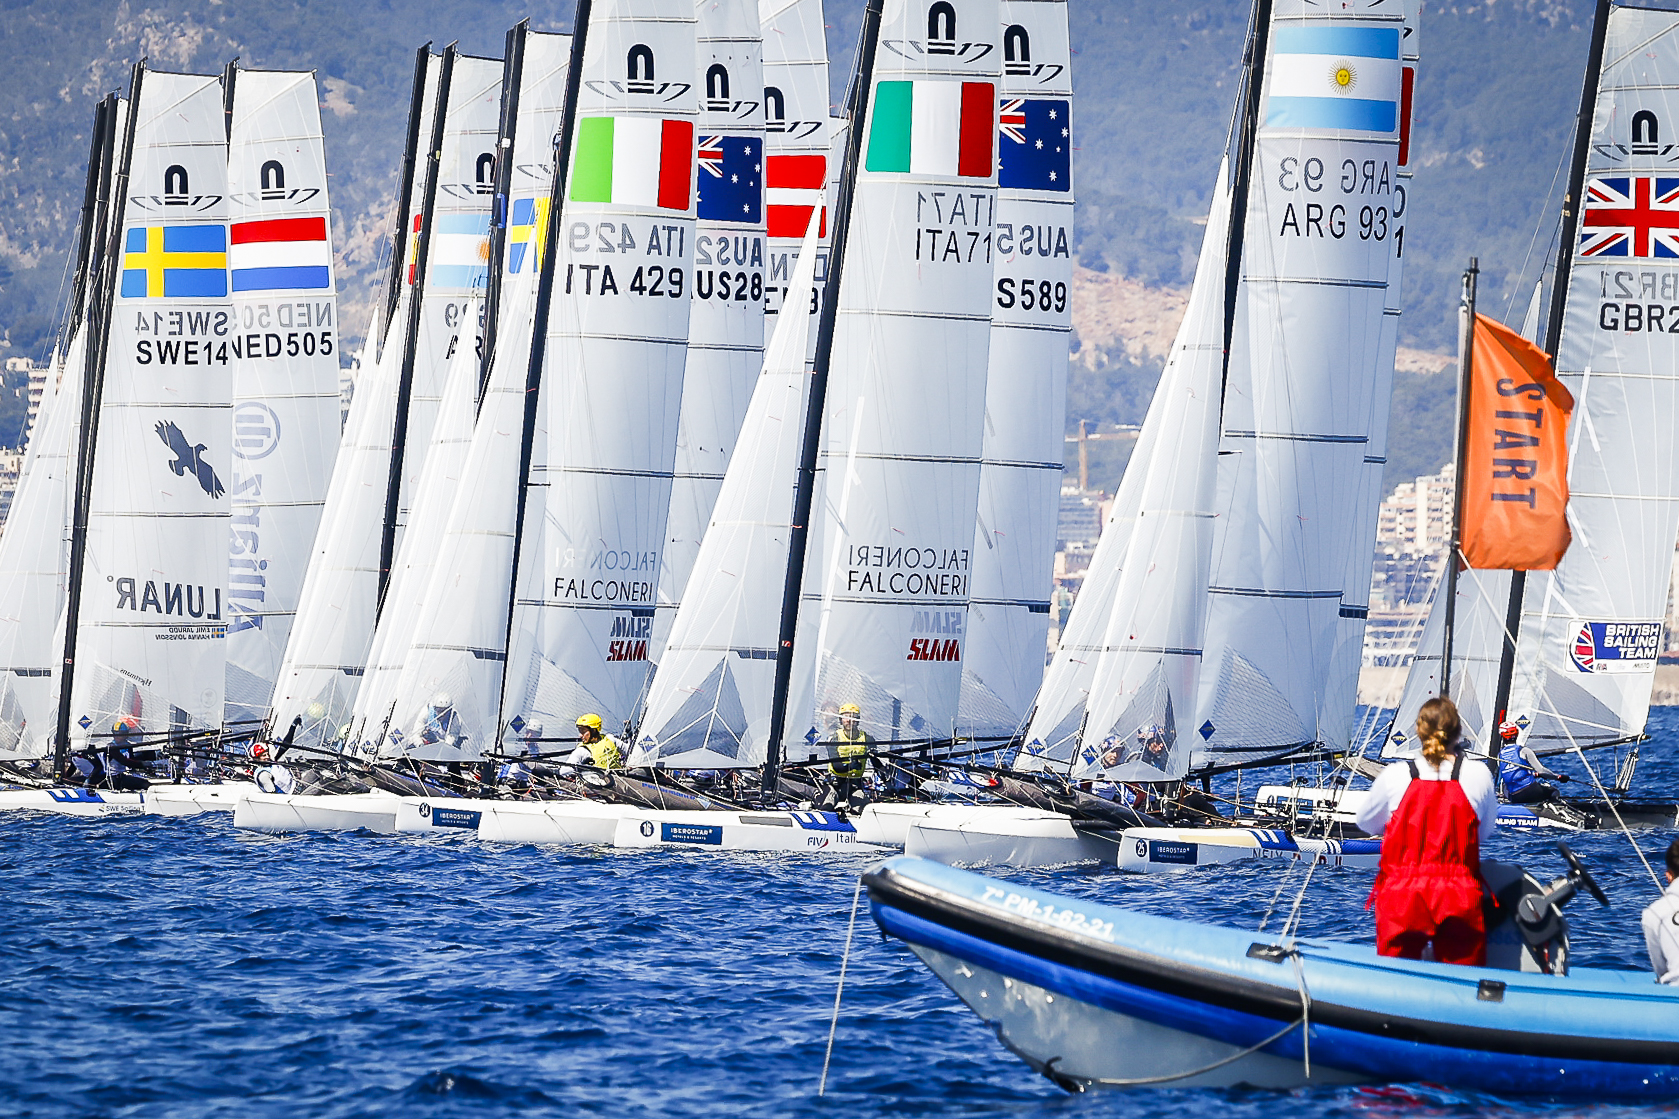 The qualifying form guide for Nacra 17 at the Sailing World Championship